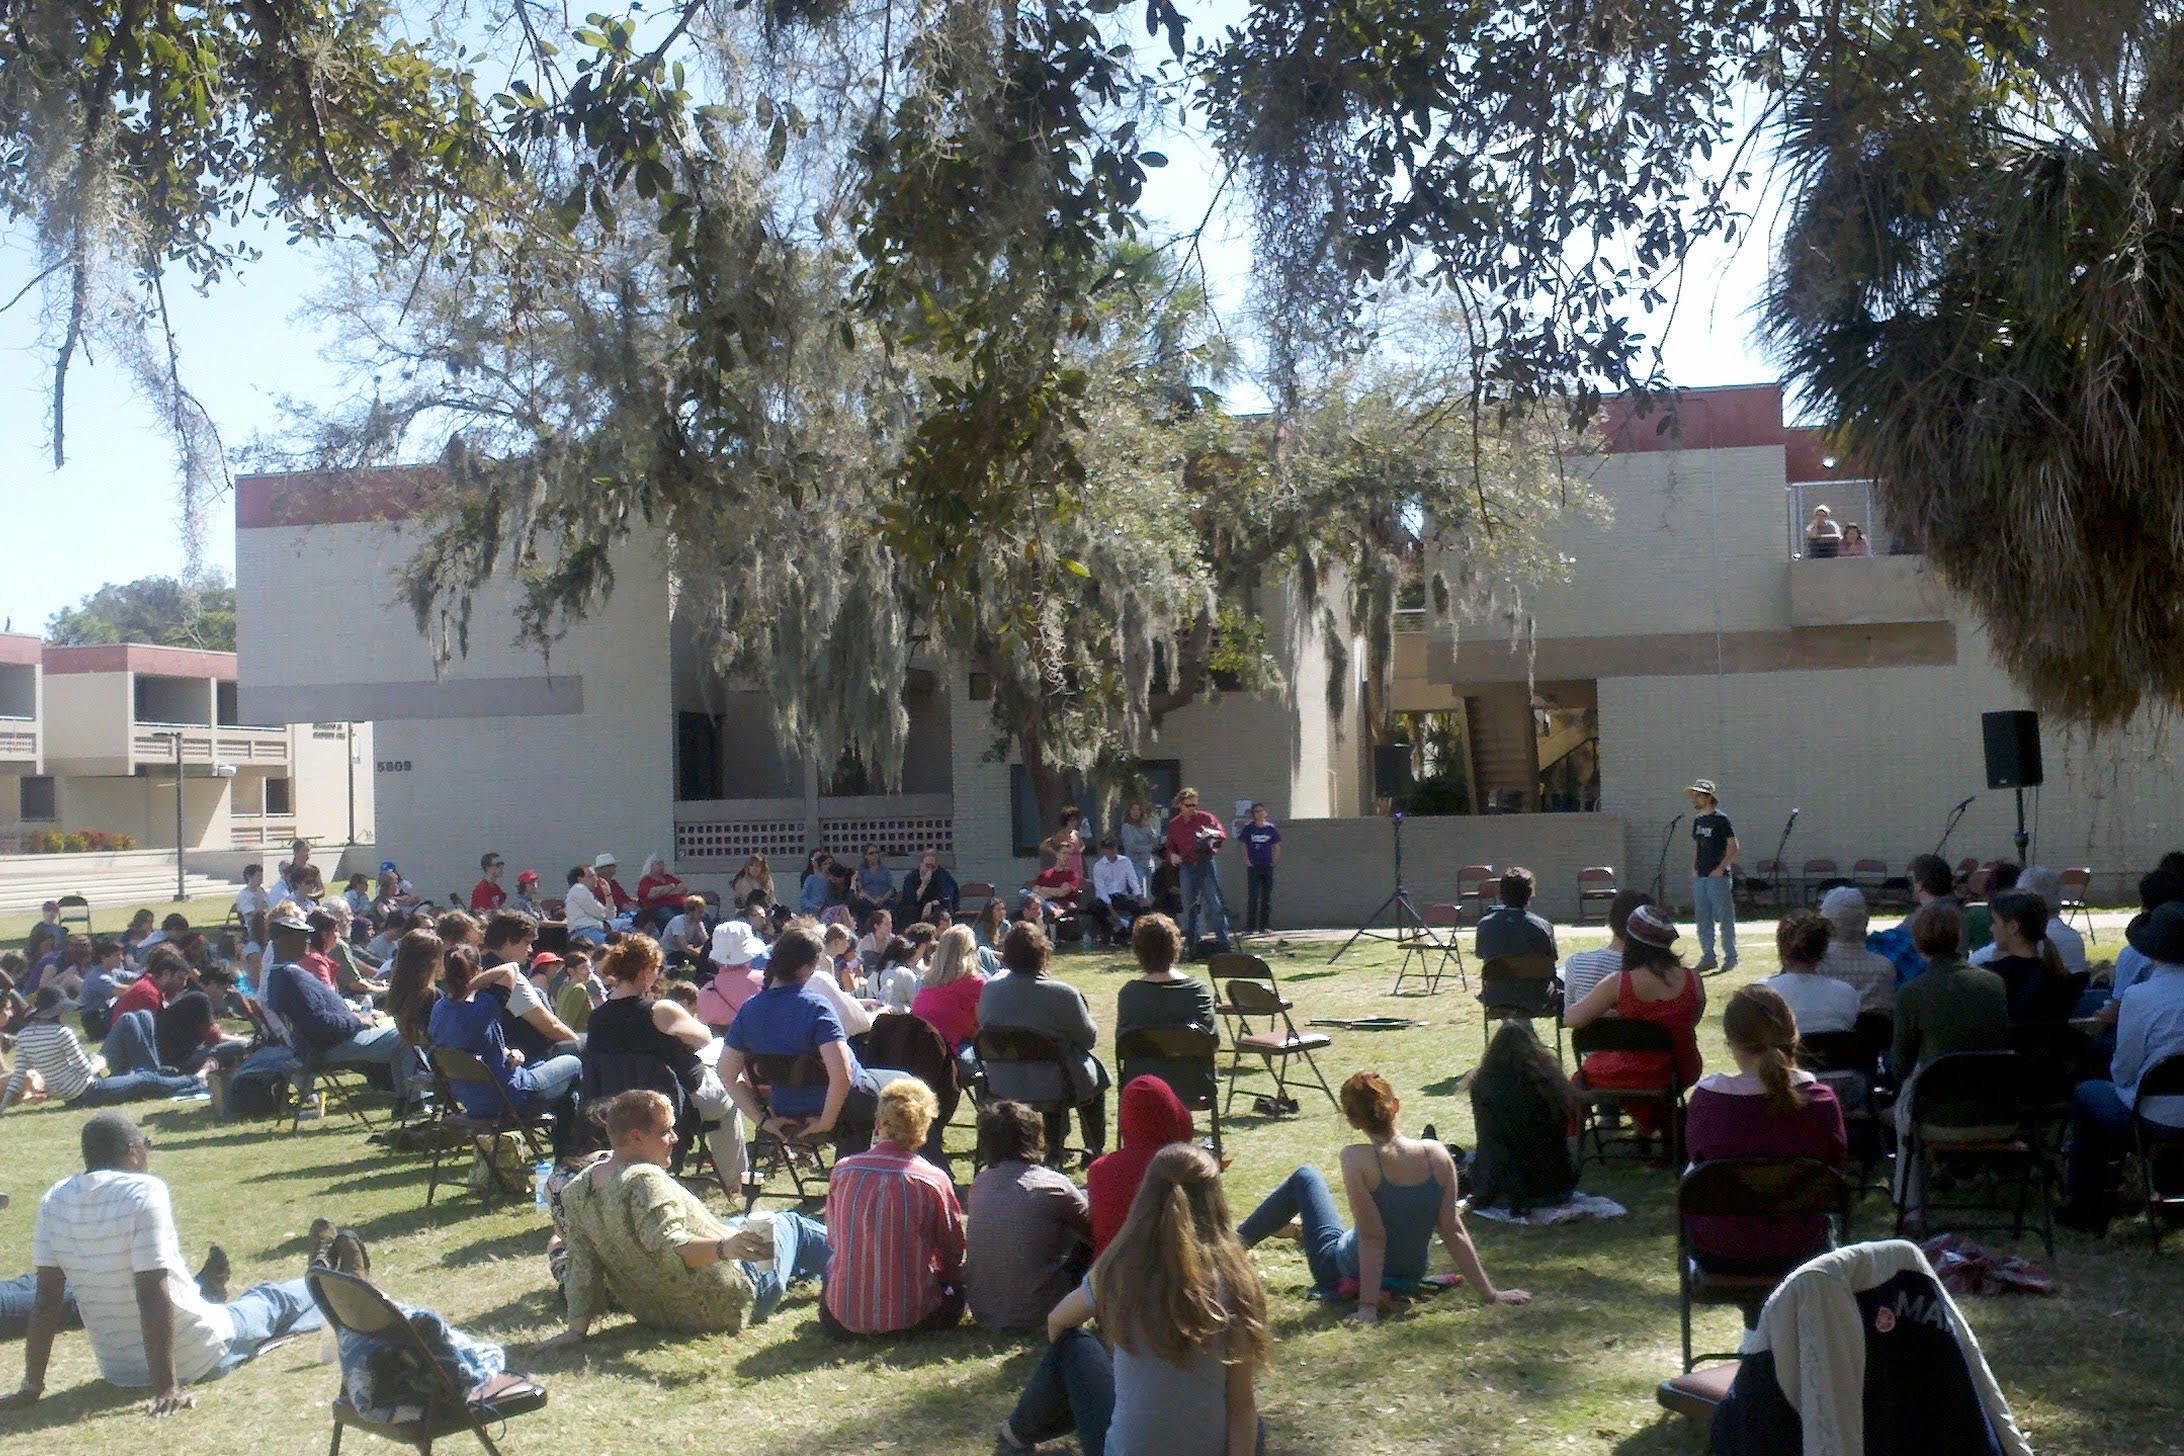 On a lawn with palm trees and oak trees with Spanish moss, a crowd of students sit on the ground or in folding chairs.